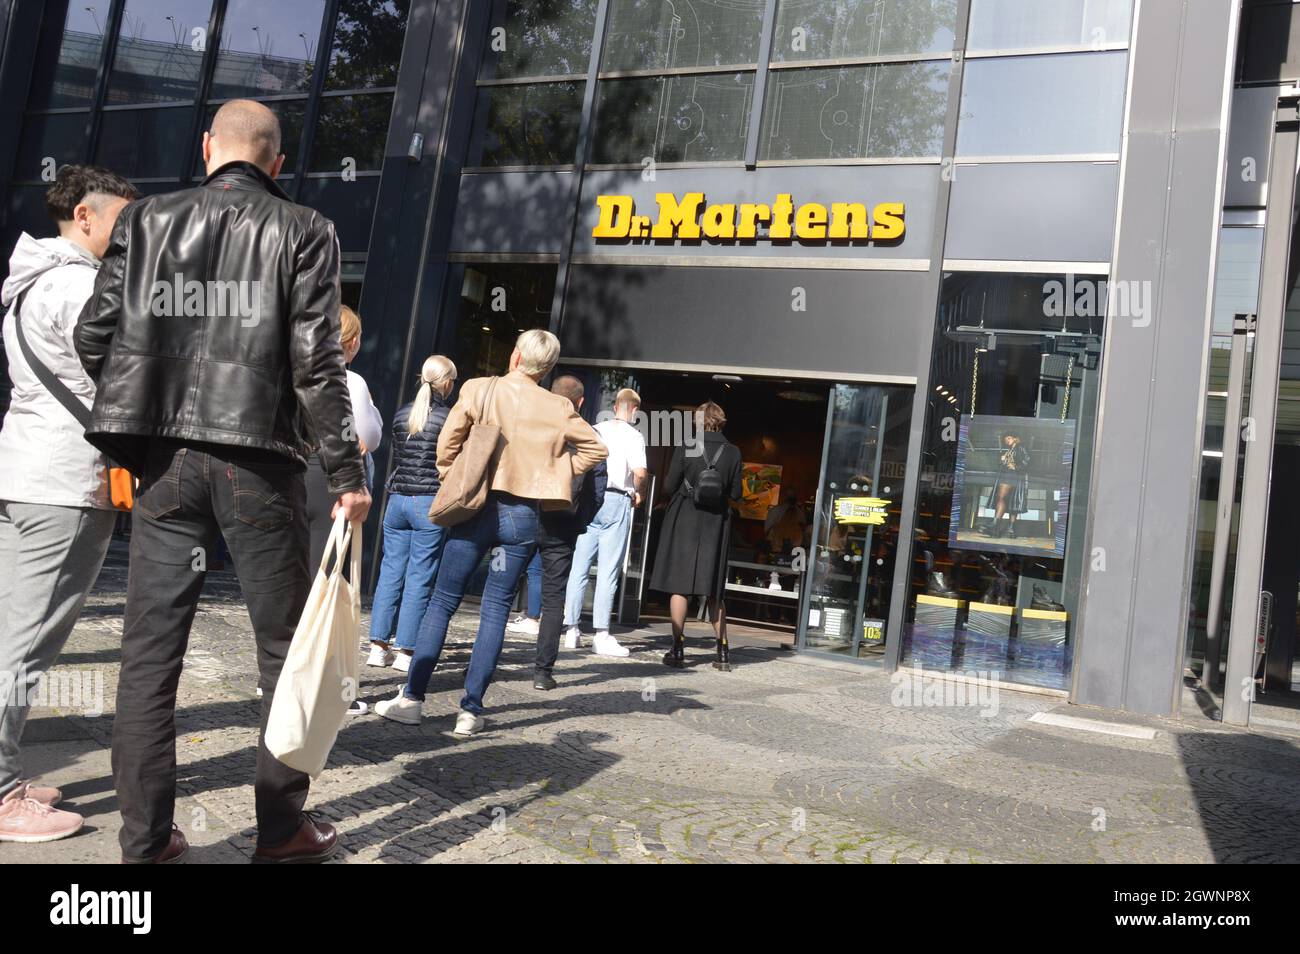 The Dr. Martens Shop at Tauentzienstrasse in Charlottenburg, Berlin, Germany - October 2, 2021. Stock Photo